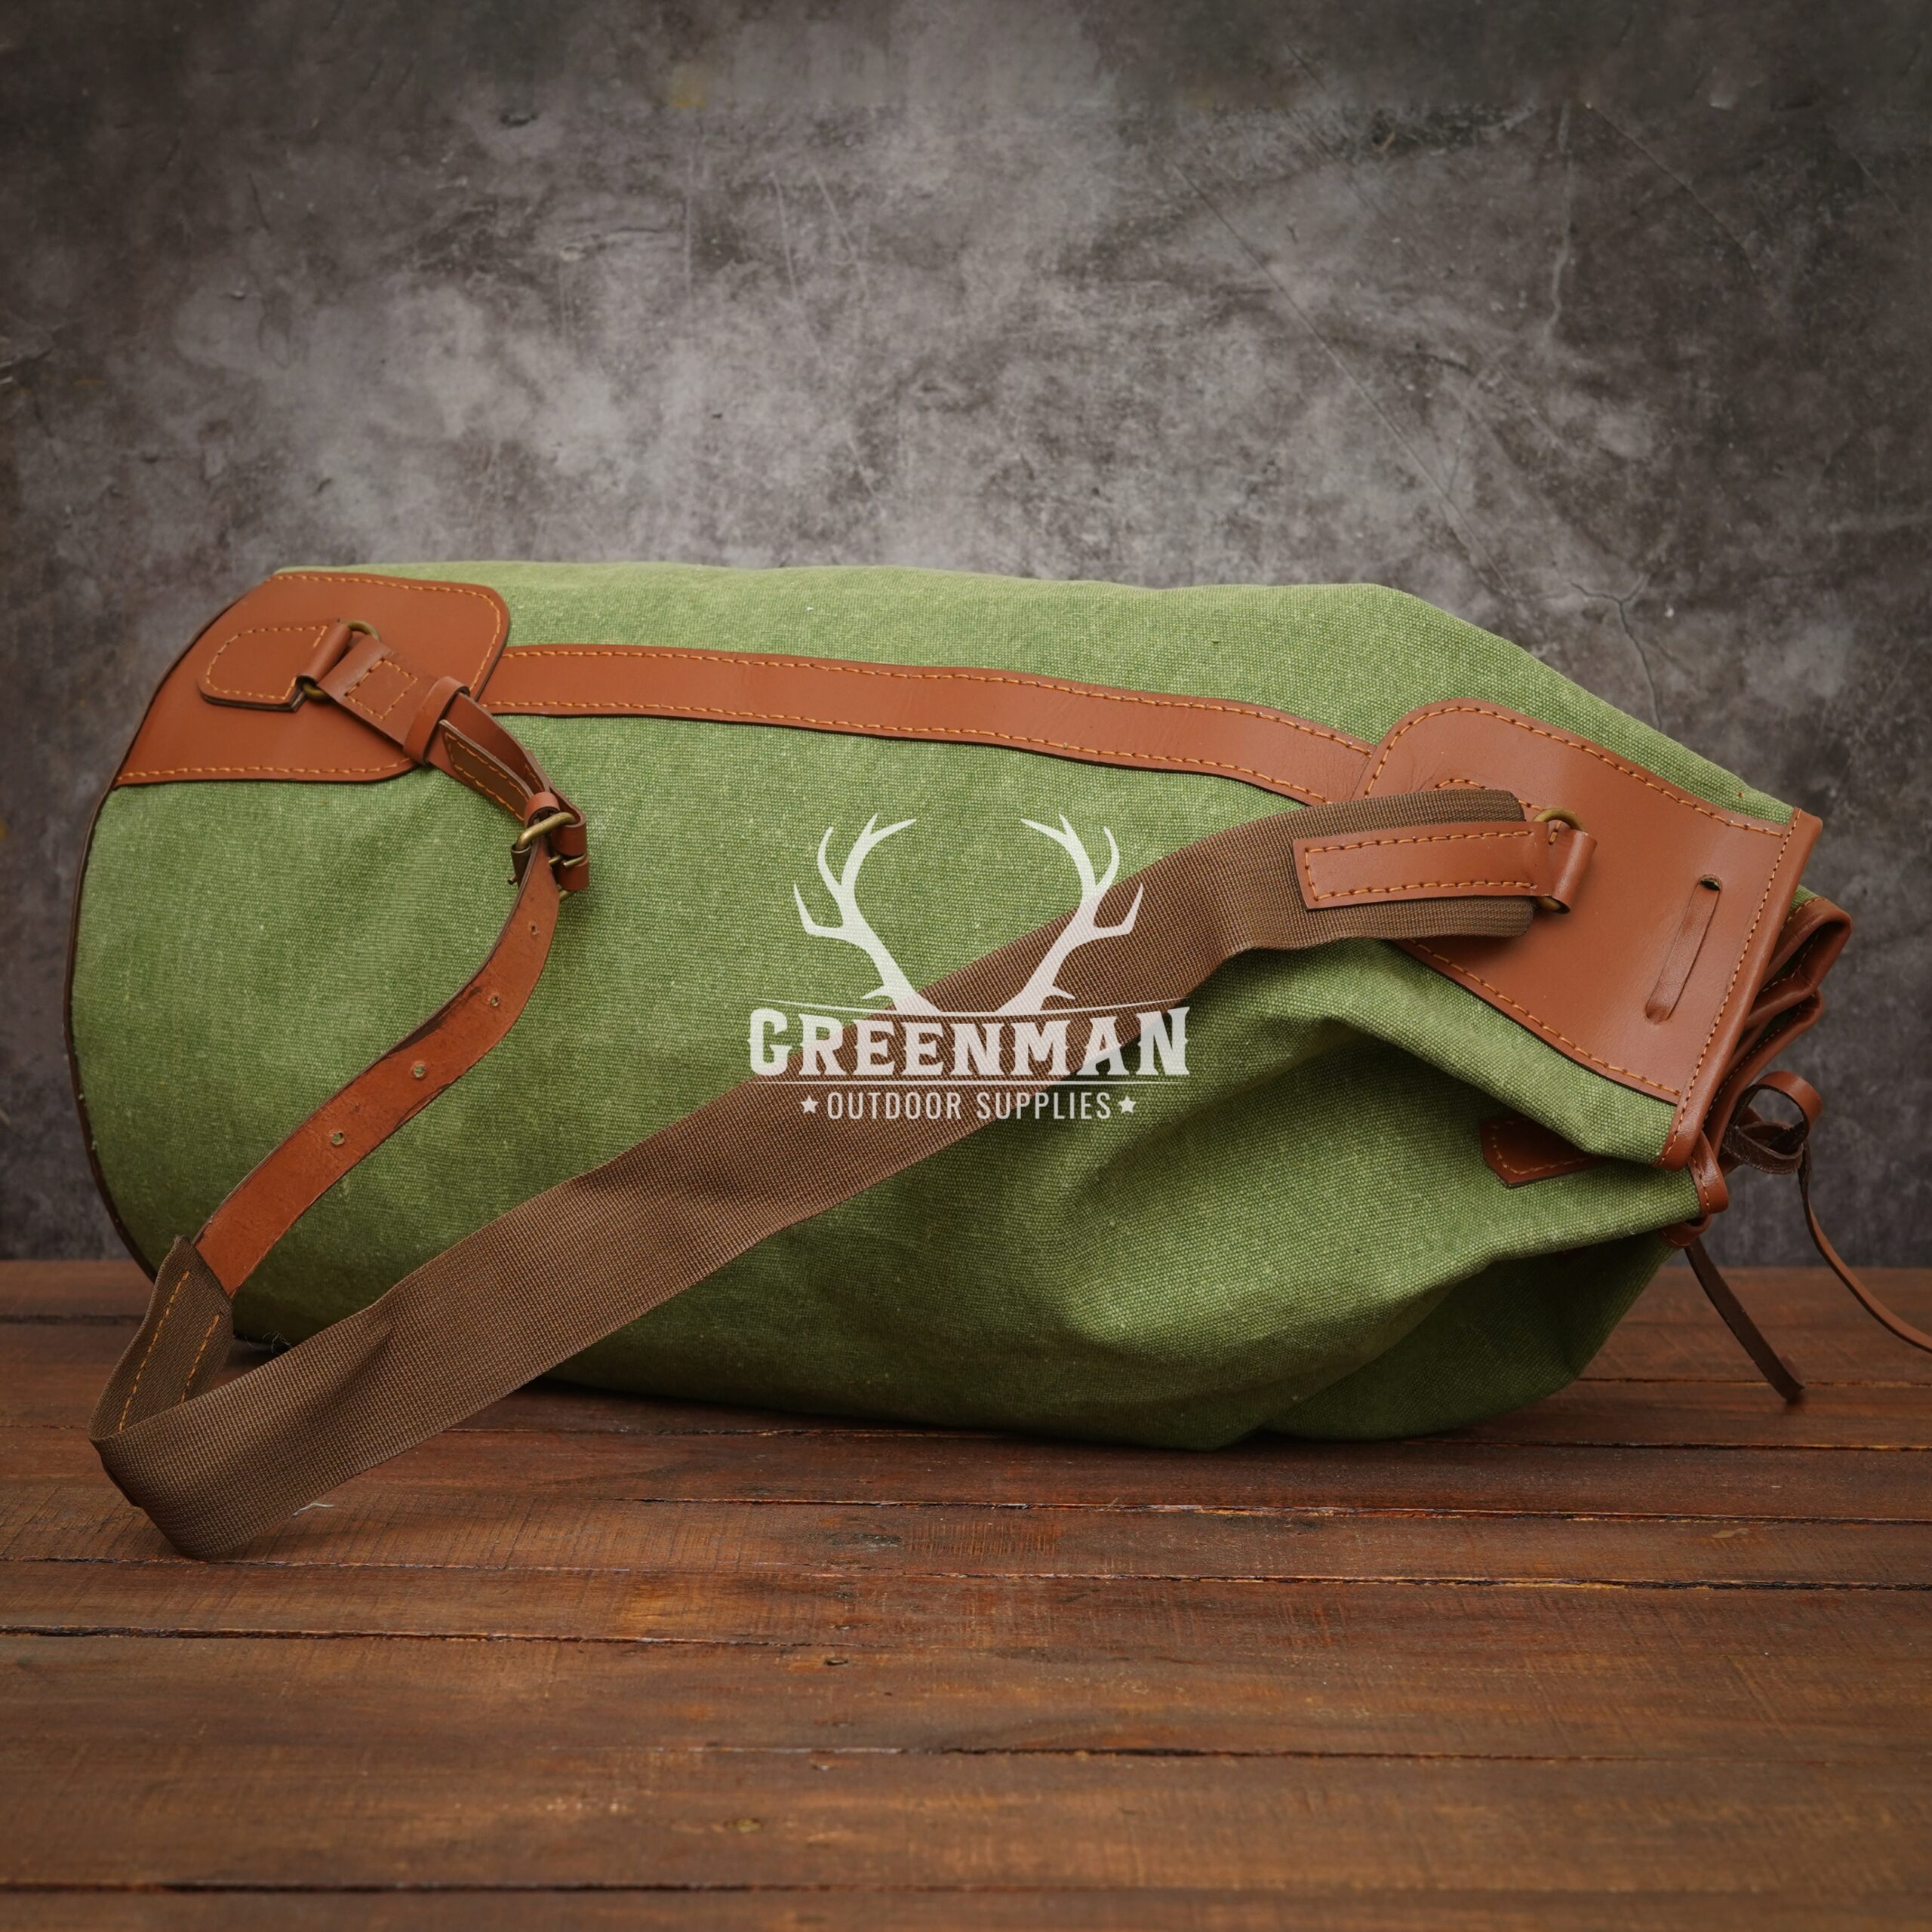 Canvas Leather Duffle Bag